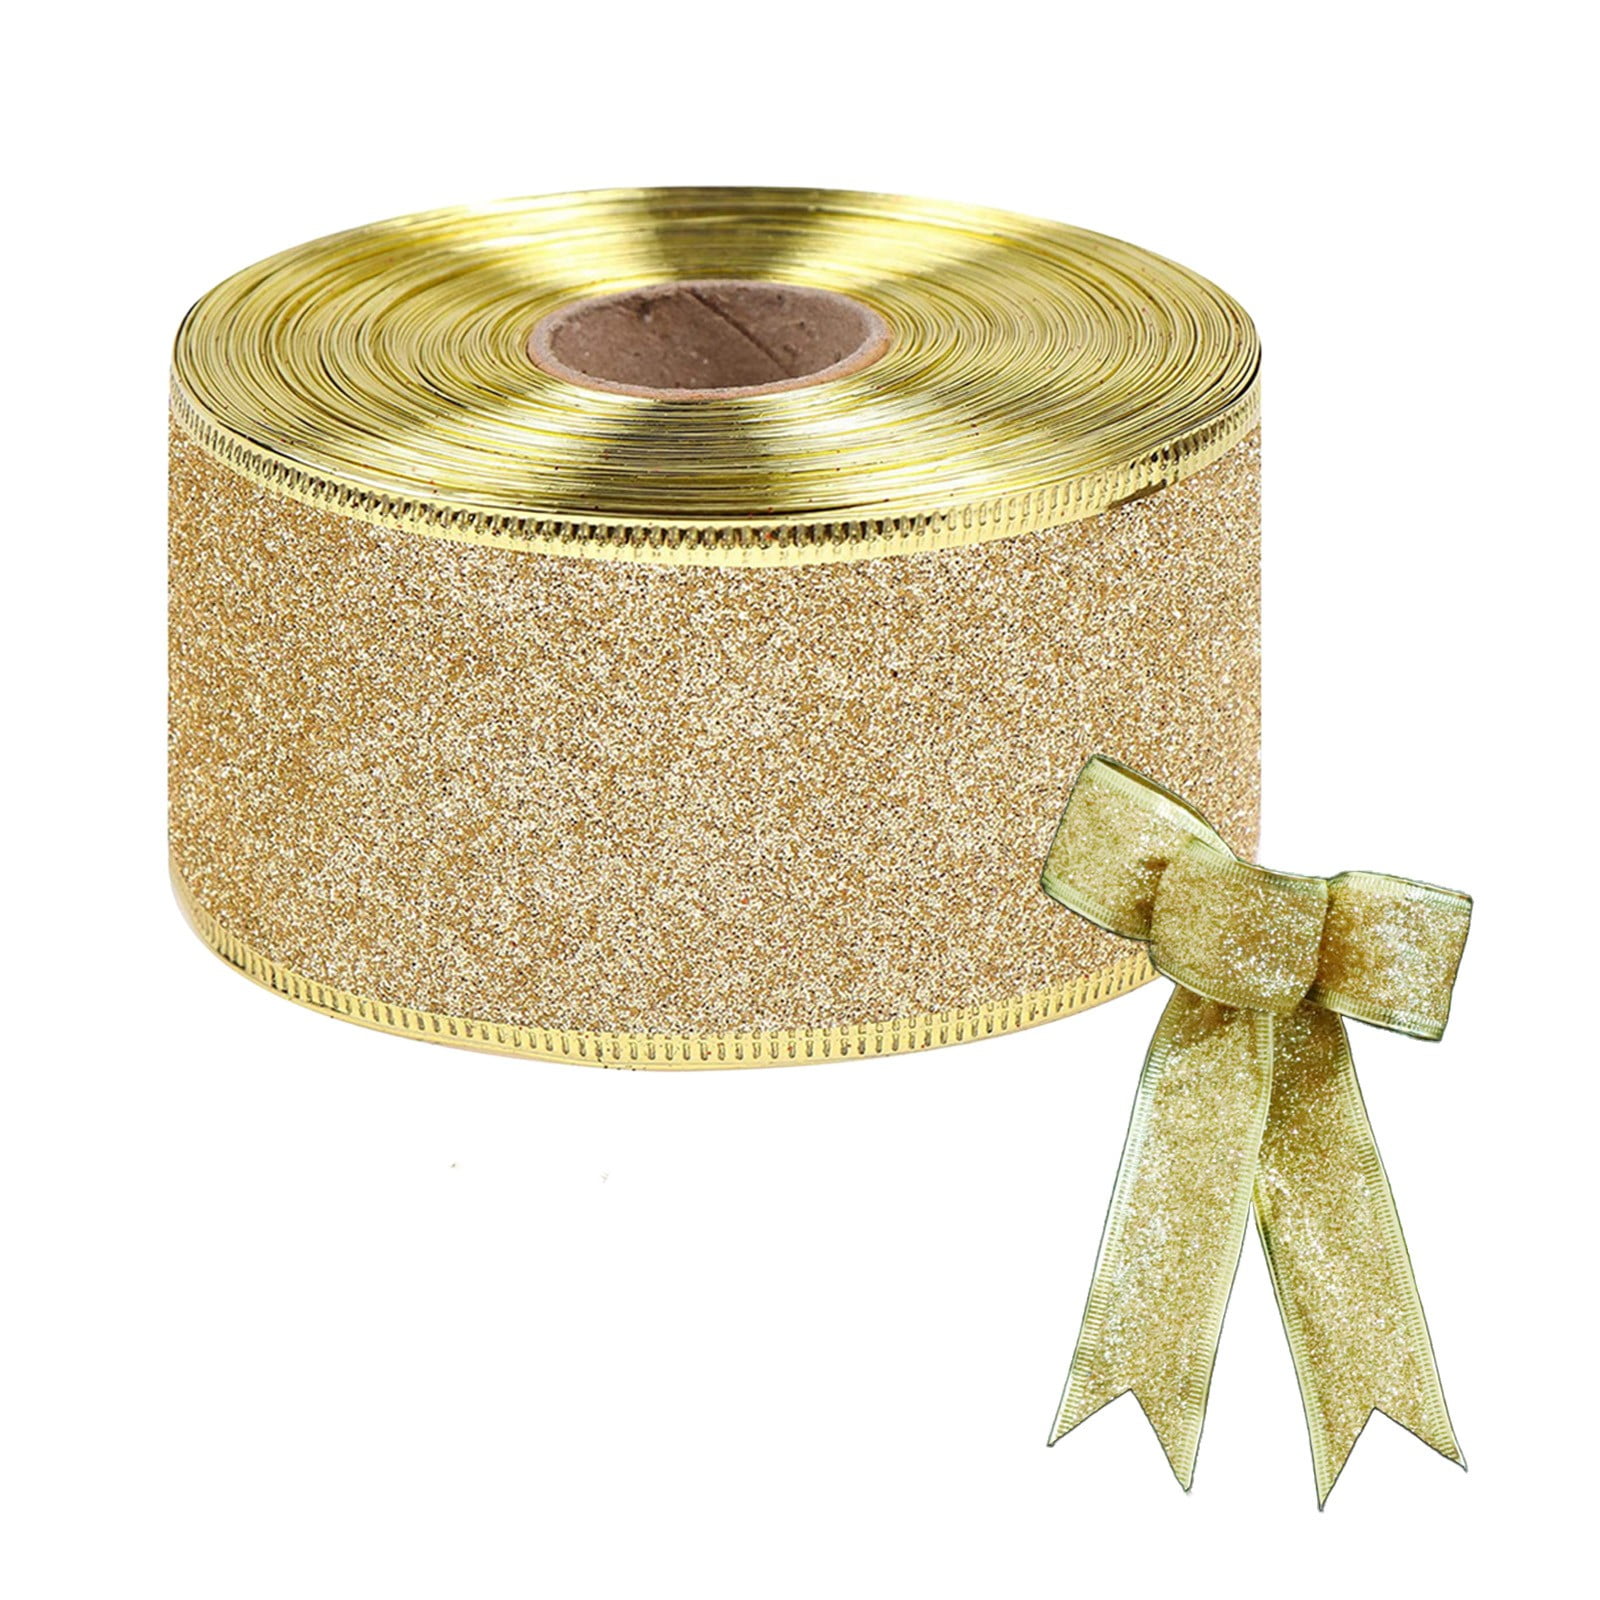 1 Inch Gold Halloween Ribbon. Sparkly Heilwiy Christmas Gold Ribbon For  Gift Wrapping. Fabric Curling Ribbon